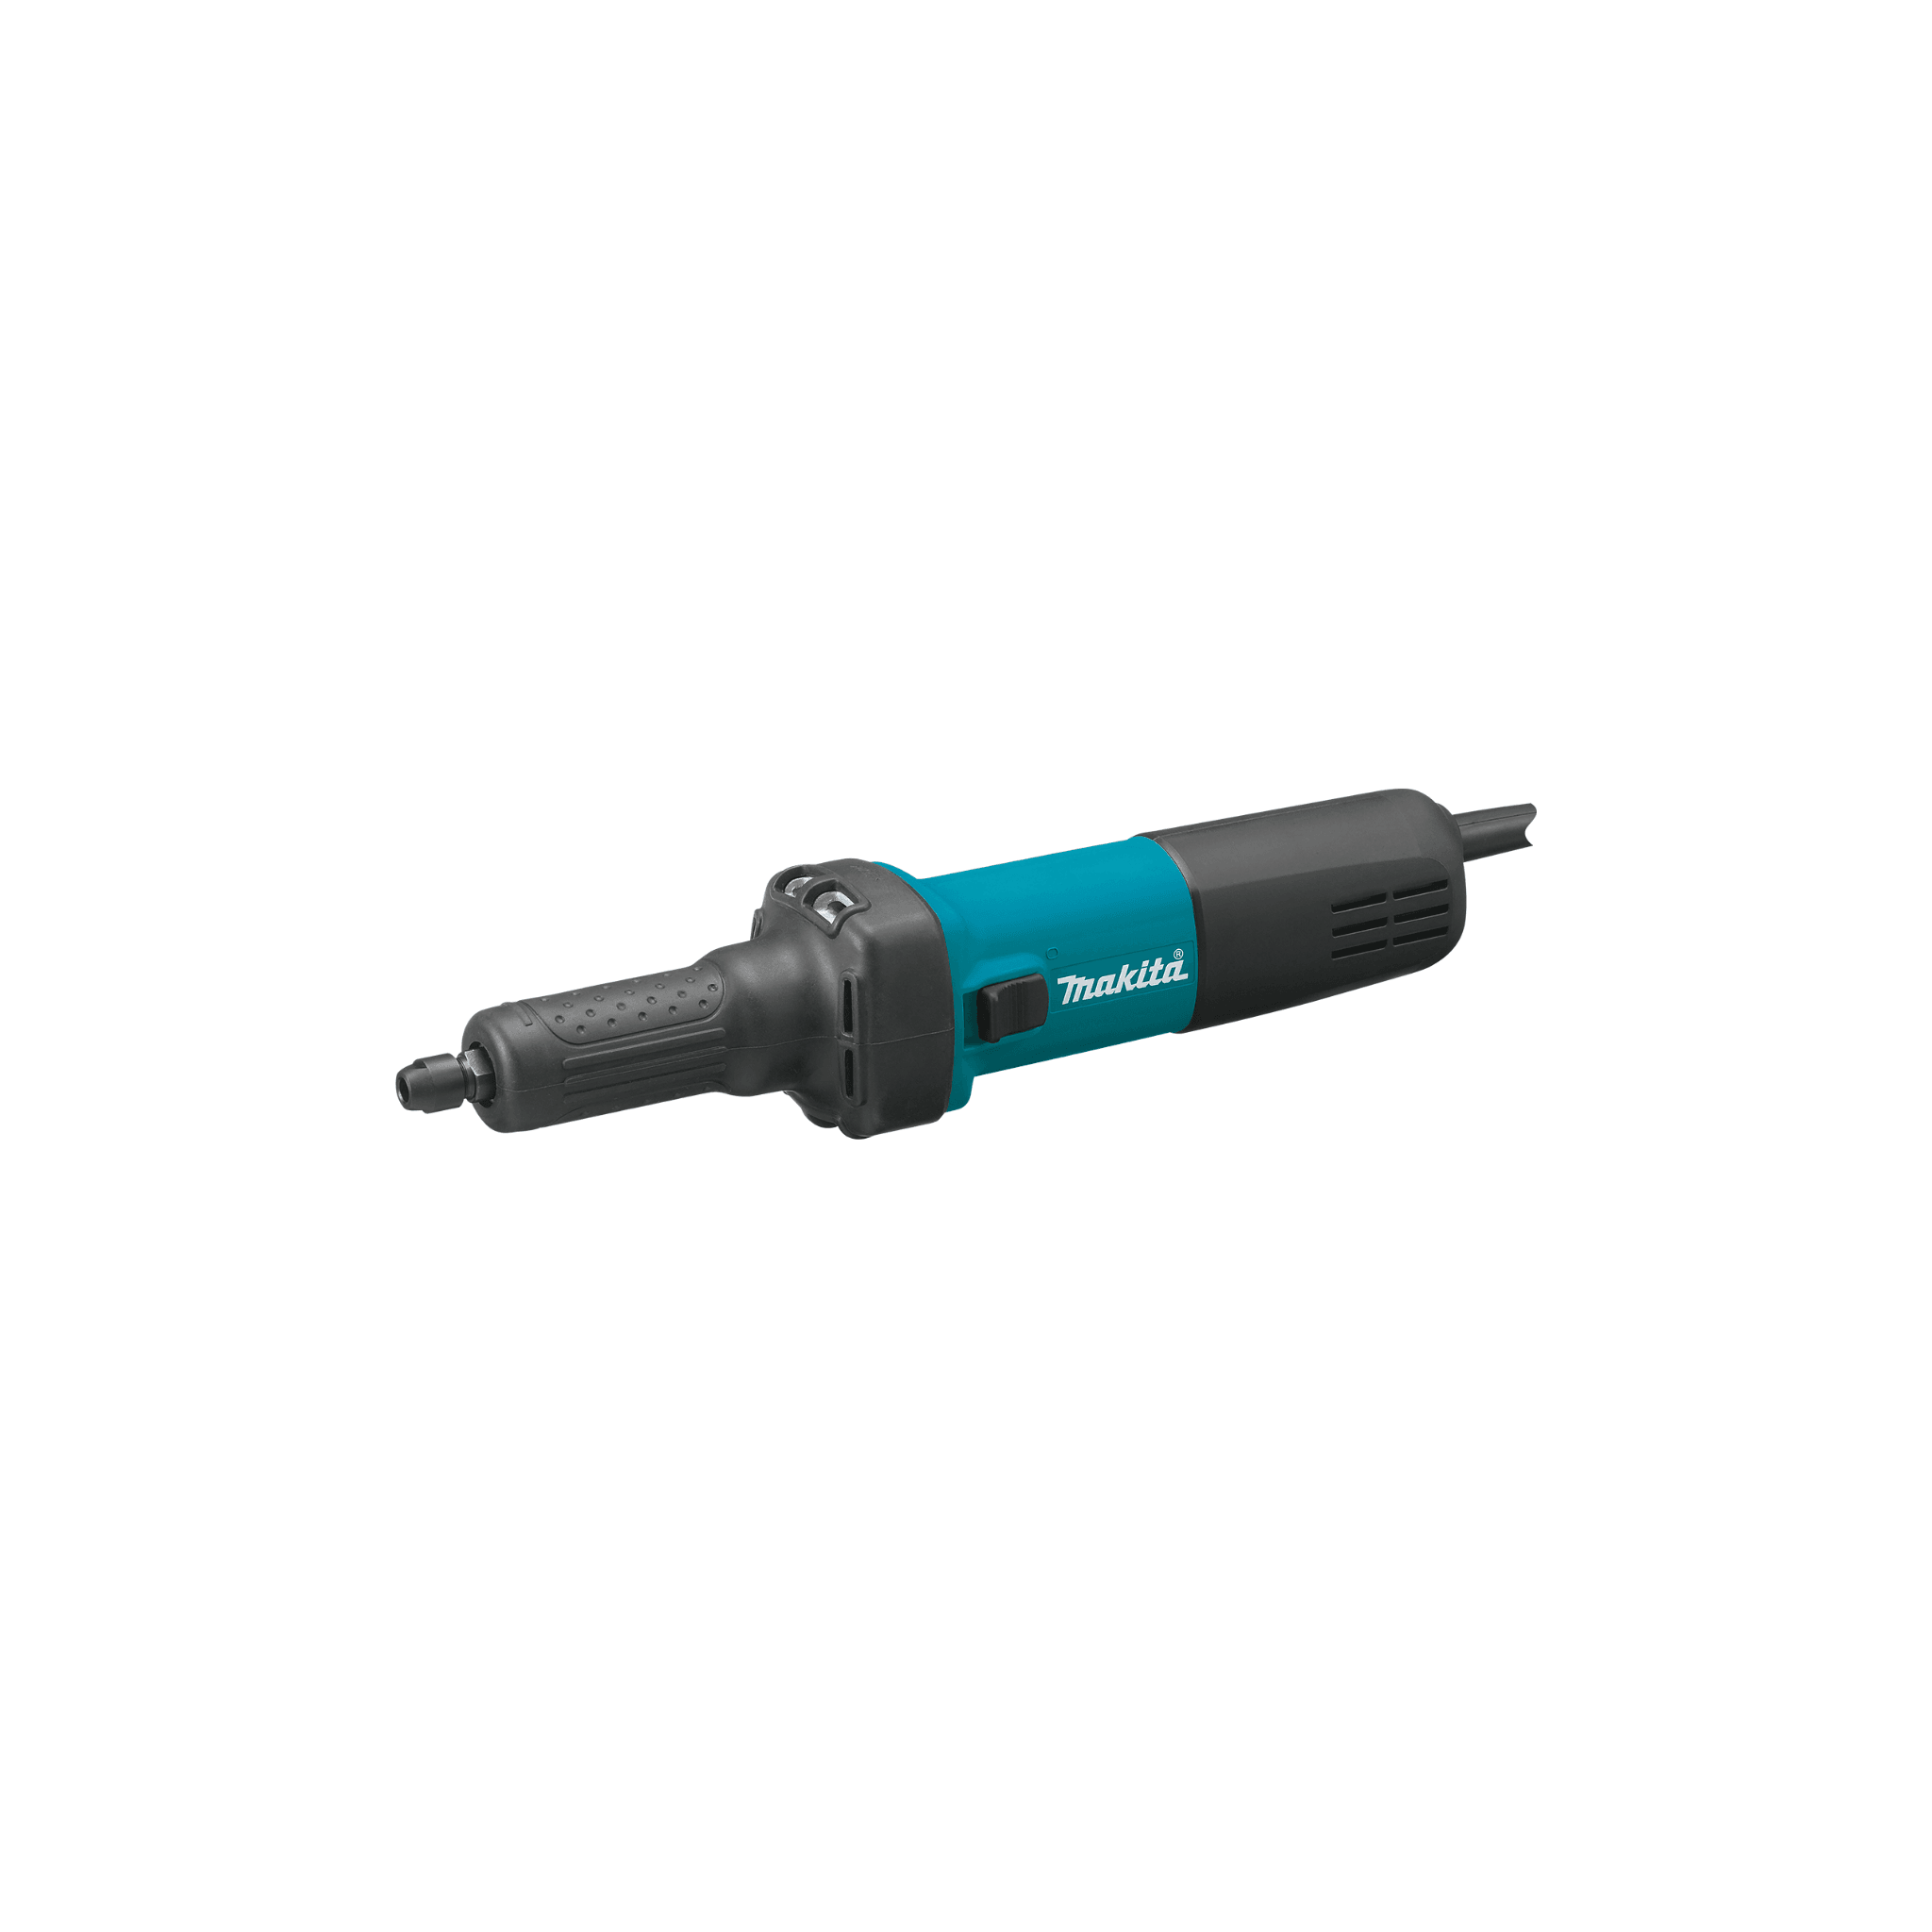 Makita GD0601 1/4" Die Grinder, with AC/DC Switch - Direct Stone Tool Supply, Inc